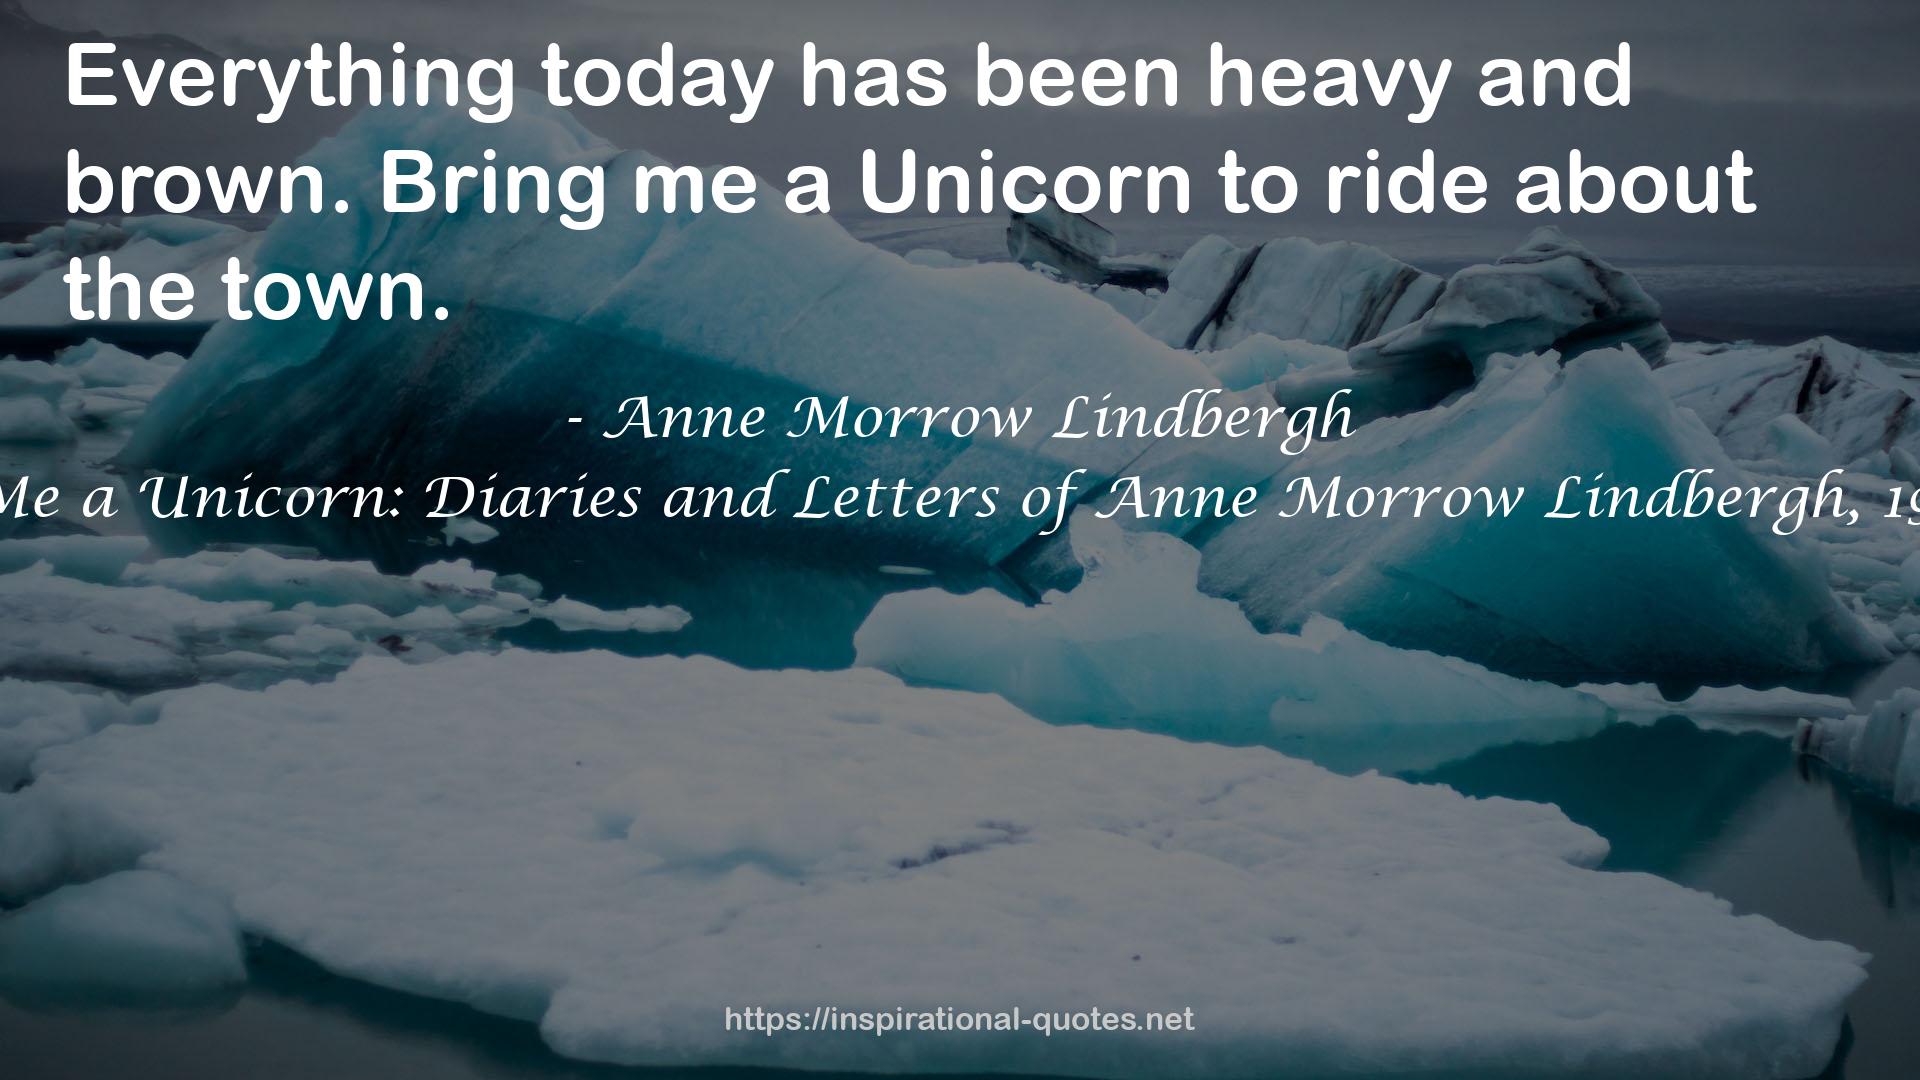 Bring Me a Unicorn: Diaries and Letters of Anne Morrow Lindbergh, 1922-1928 QUOTES